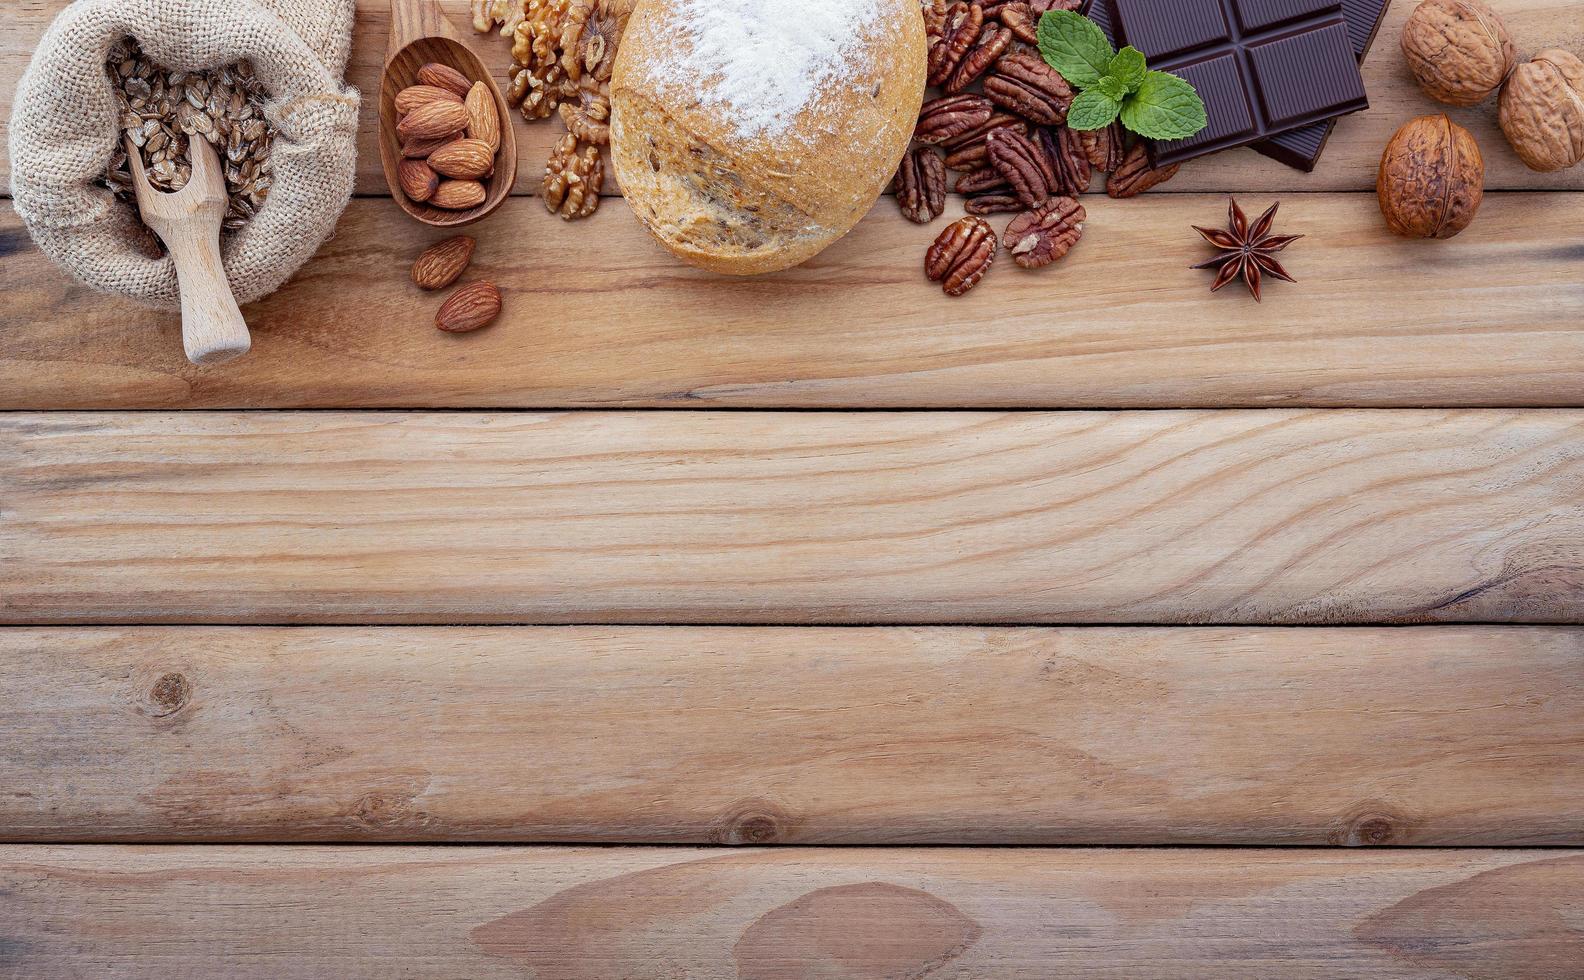 Ingredients for healthy food selection. Concept of healthy food set up on a shabby wooden background photo